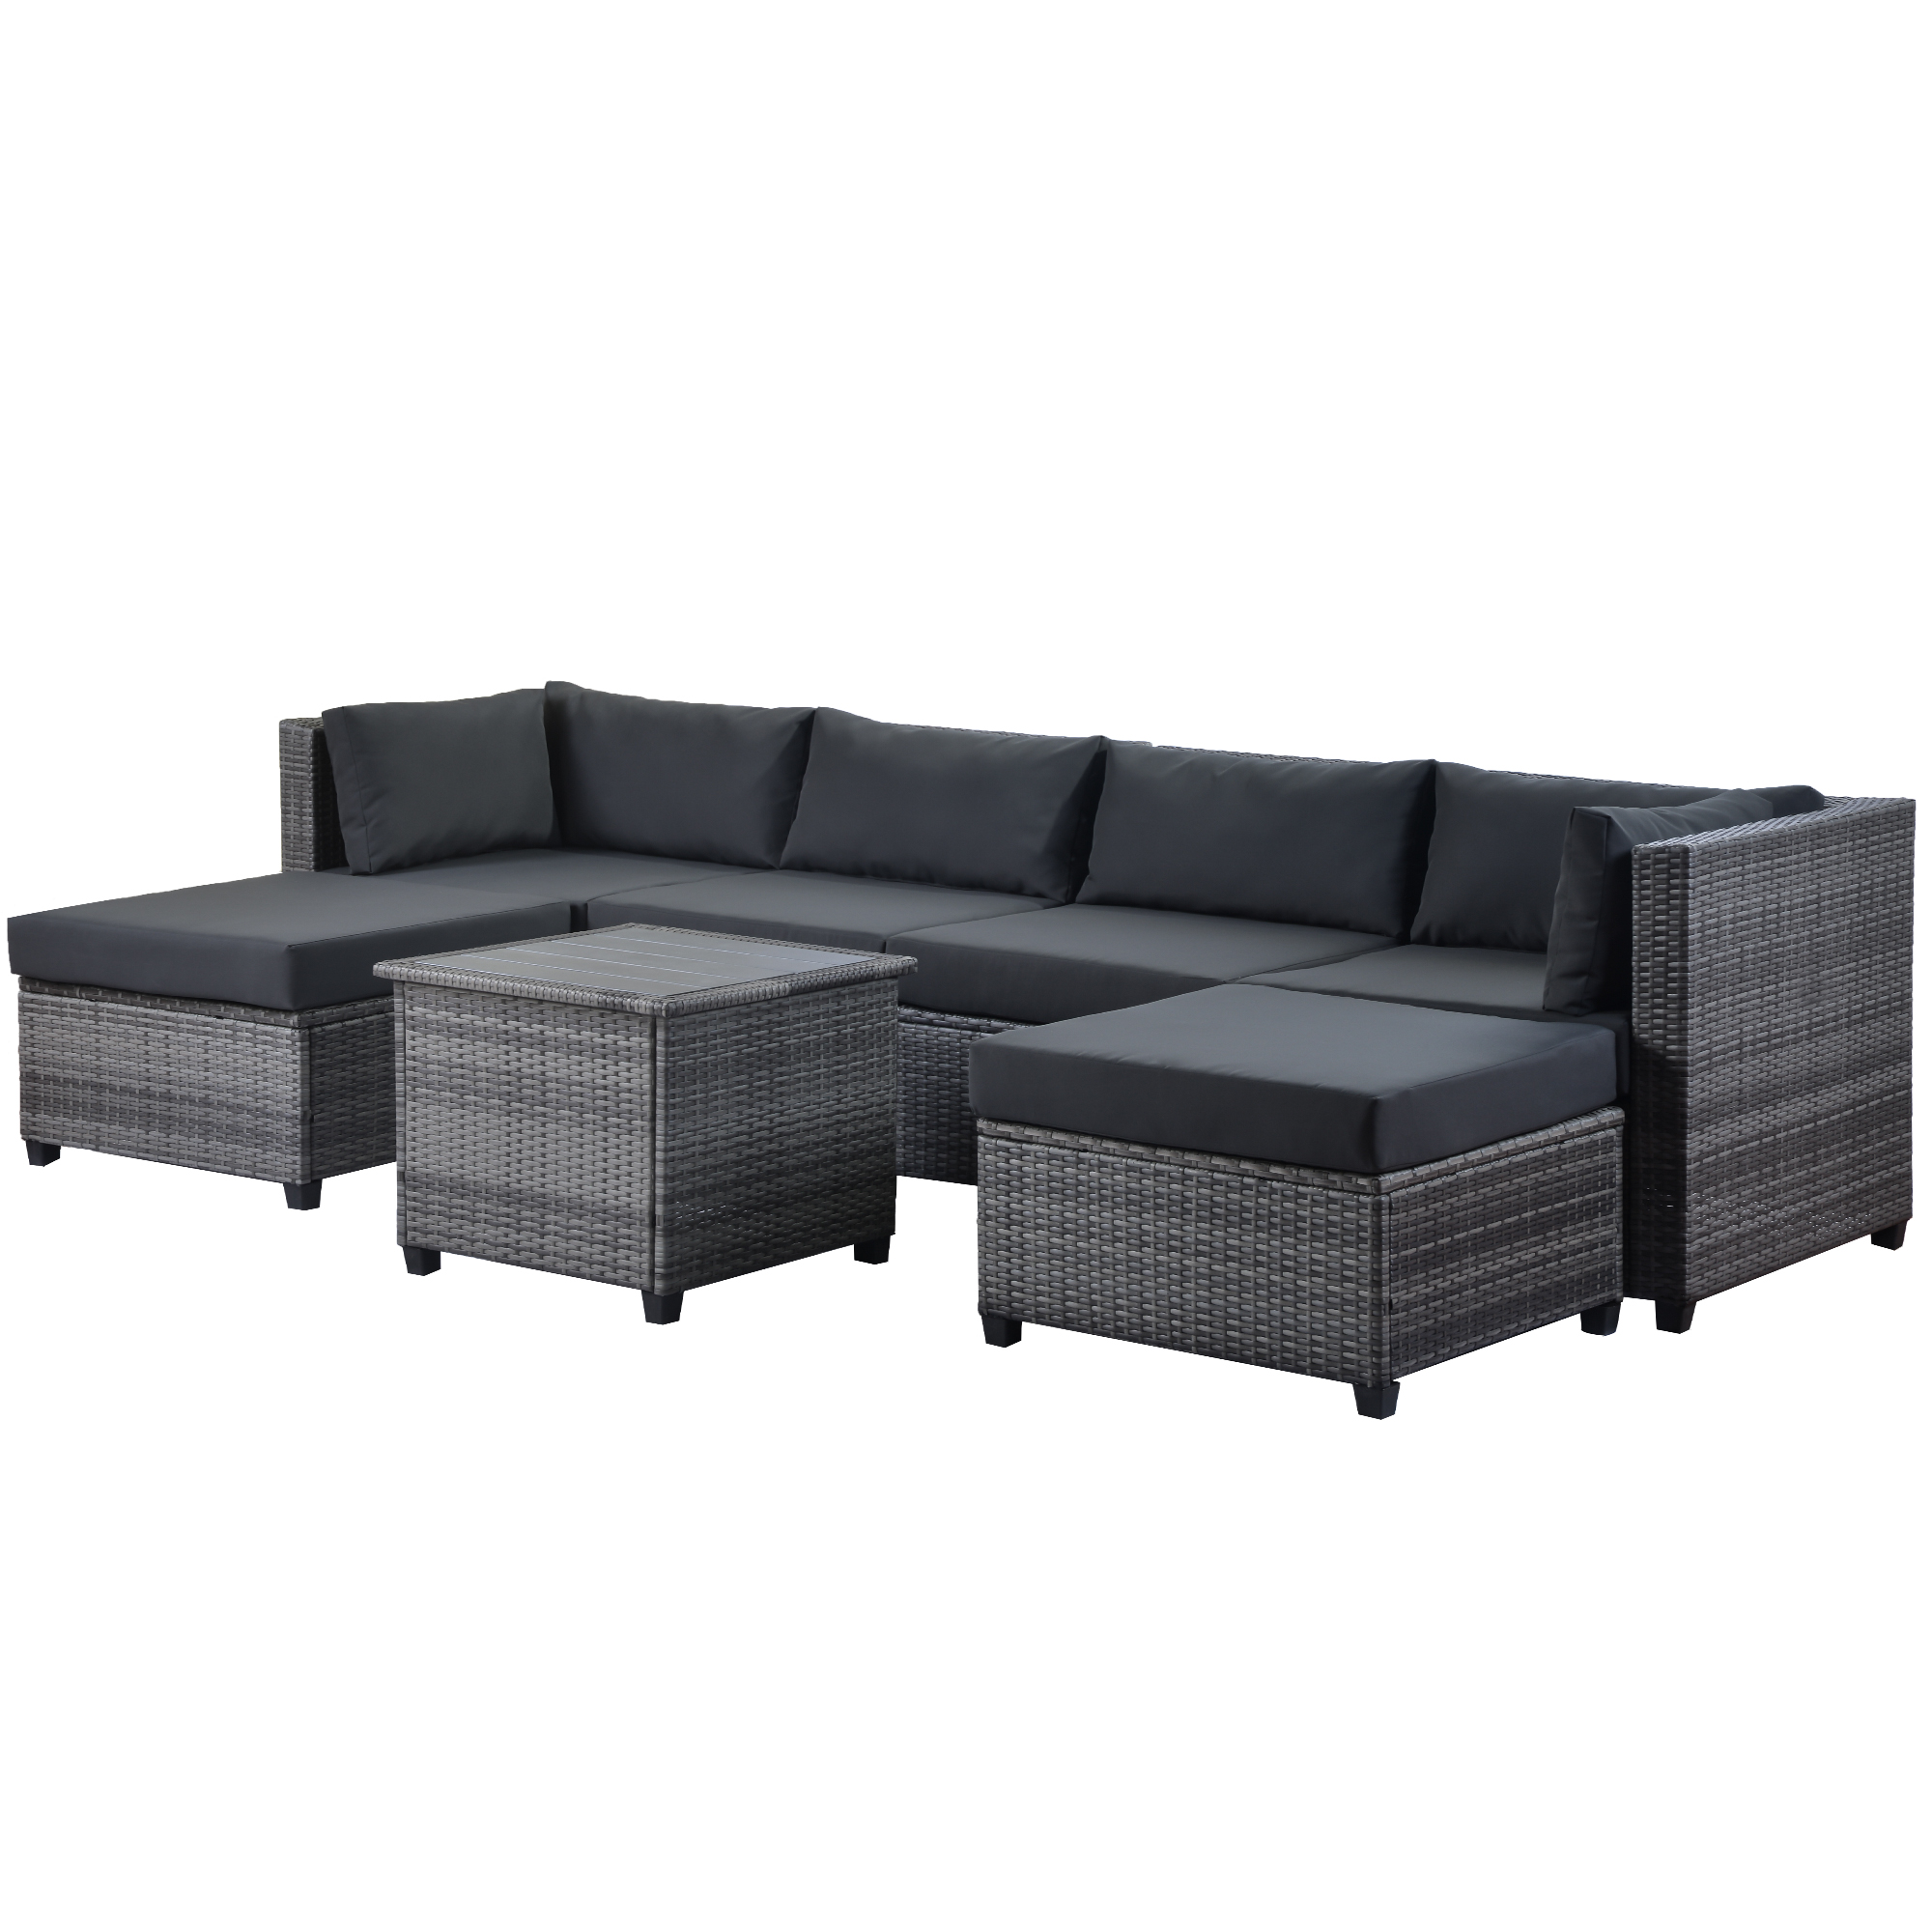 Wicker Patio Sets, 7 Piece Patio Furniture Sofa Sets with 4 PE Wicker Sofas, 2 Ottoman, Coffee Table, All-Weather Patio Conversation Set with Cushions for Backyard, Porch, Garden, Poolside, LLL39 - image 5 of 10